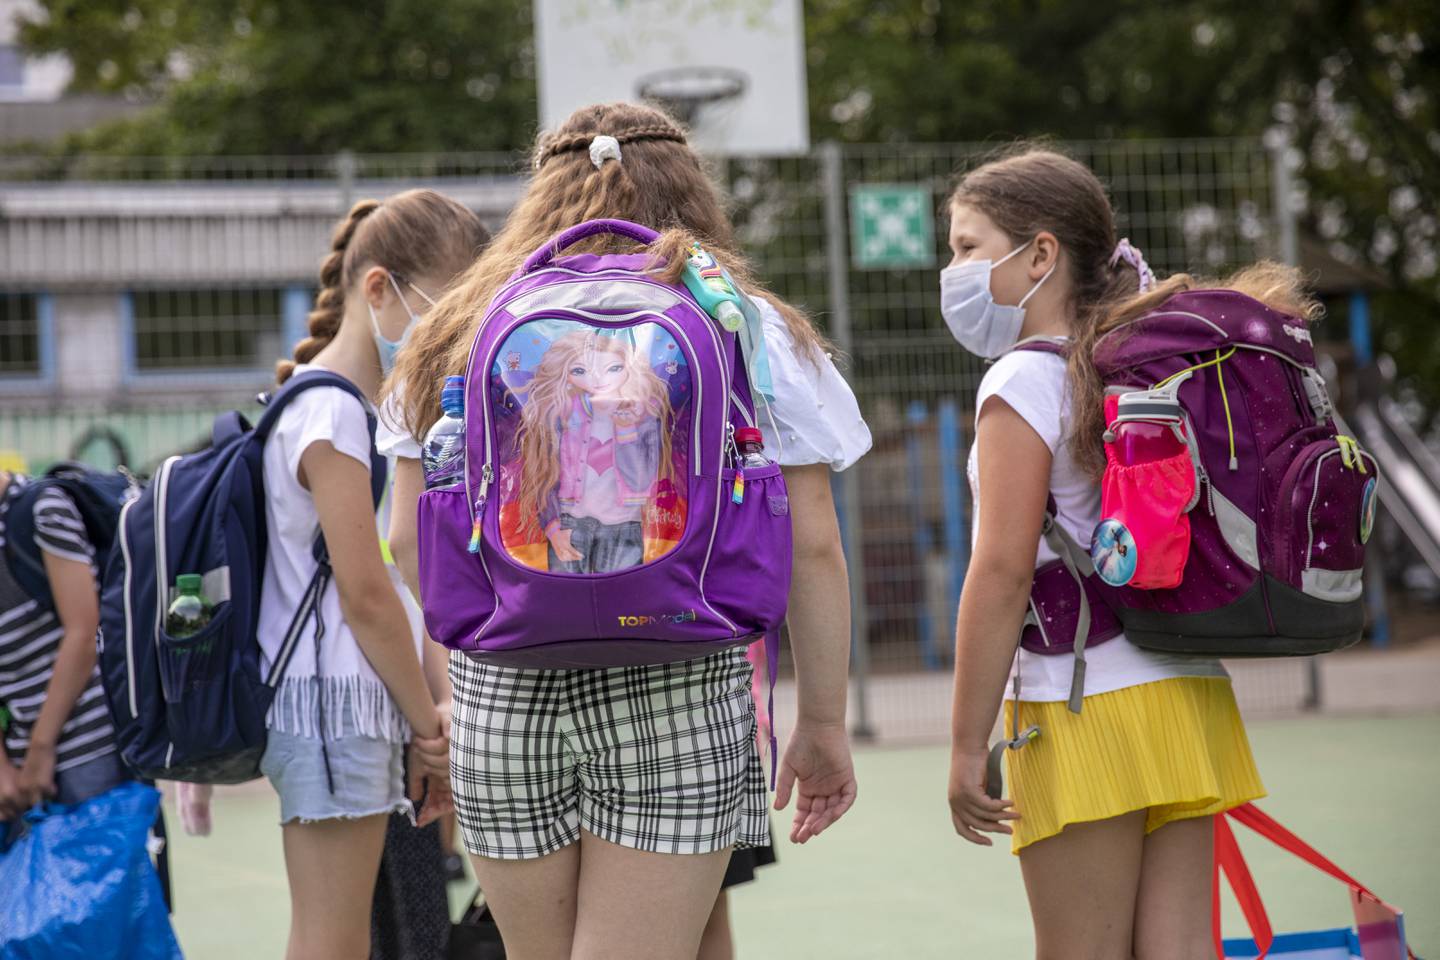 BERLIN, GERMANY - AUGUST 10: Children wearing protective face masks arrive for the first day of classes of the new school year at the GuthsMuths elementary school during the coronavirus pandemic on August 10, 2020 in Berlin, Germany. Classes at schools across Germany are beginning this month with face mask requirements varying by state. Coronavirus infection rates are climbing again in Germany, from an average of 400 new cases per day about two weeks ago to over 1,100 yesterday, according to the Robert Koch Institute.